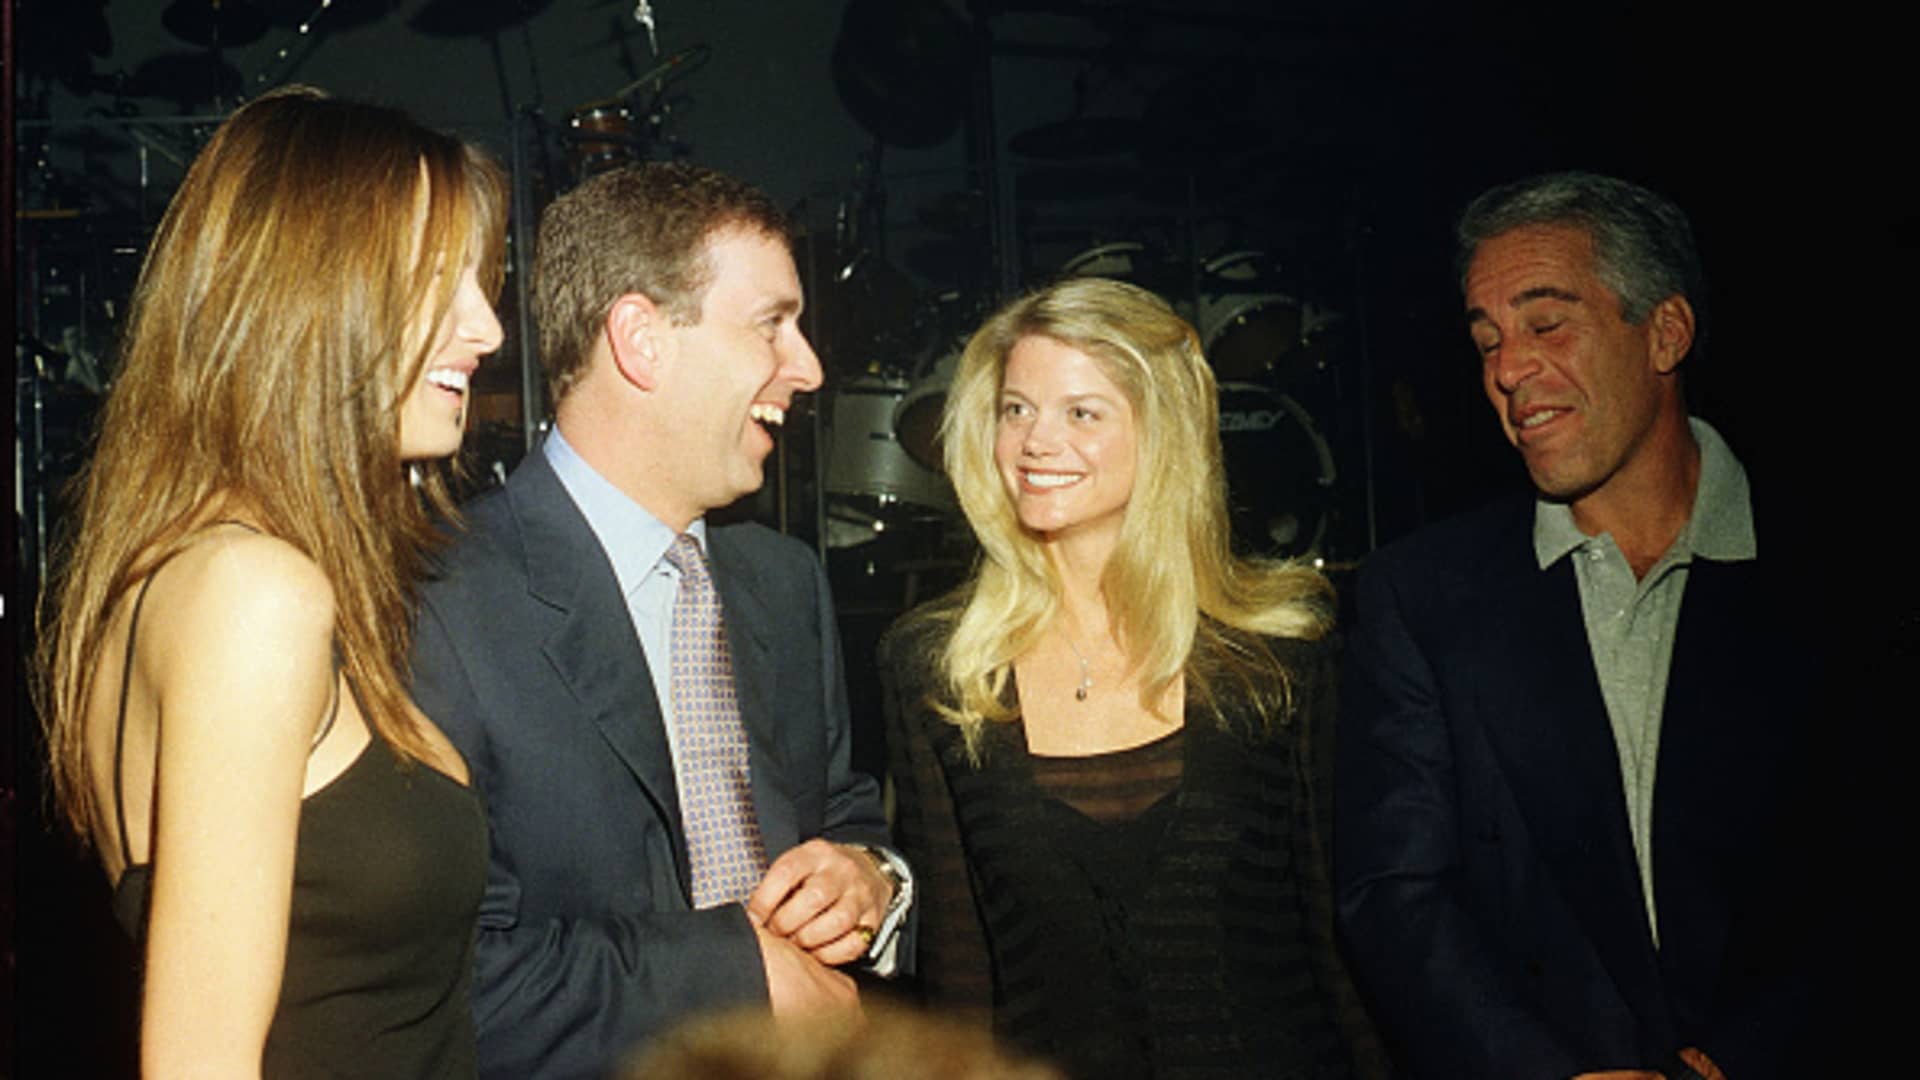 Melania Trump, Prince Andrew, Gwendolyn Beck and Jeffrey Epstein at a party at the Mar-a-Lago club, Palm Beach, Florida, February 12, 2000.